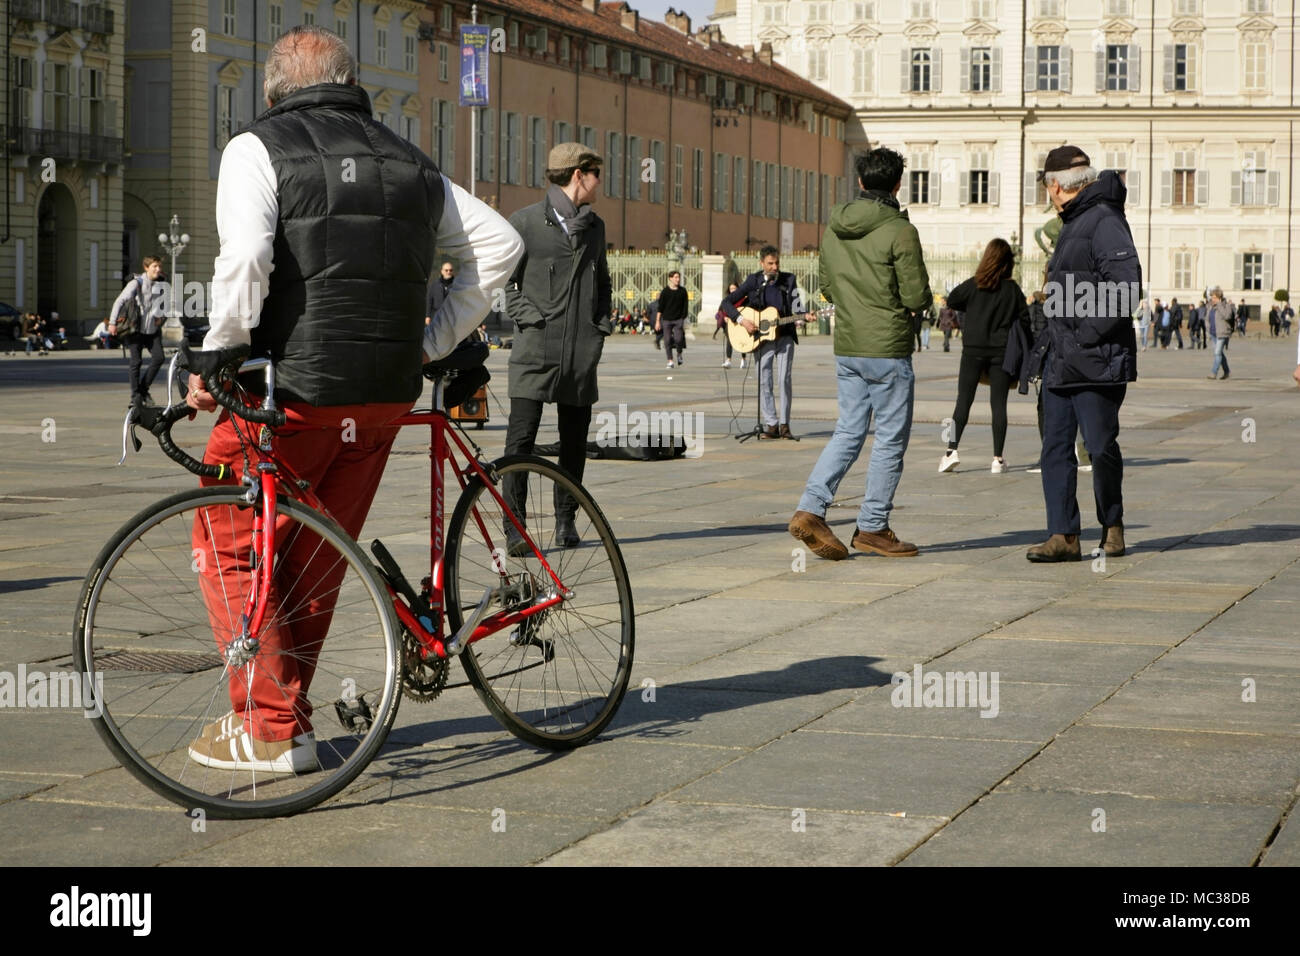 People watching street entertainer singing, Piazza Castello, Turin, Italy. Stock Photo